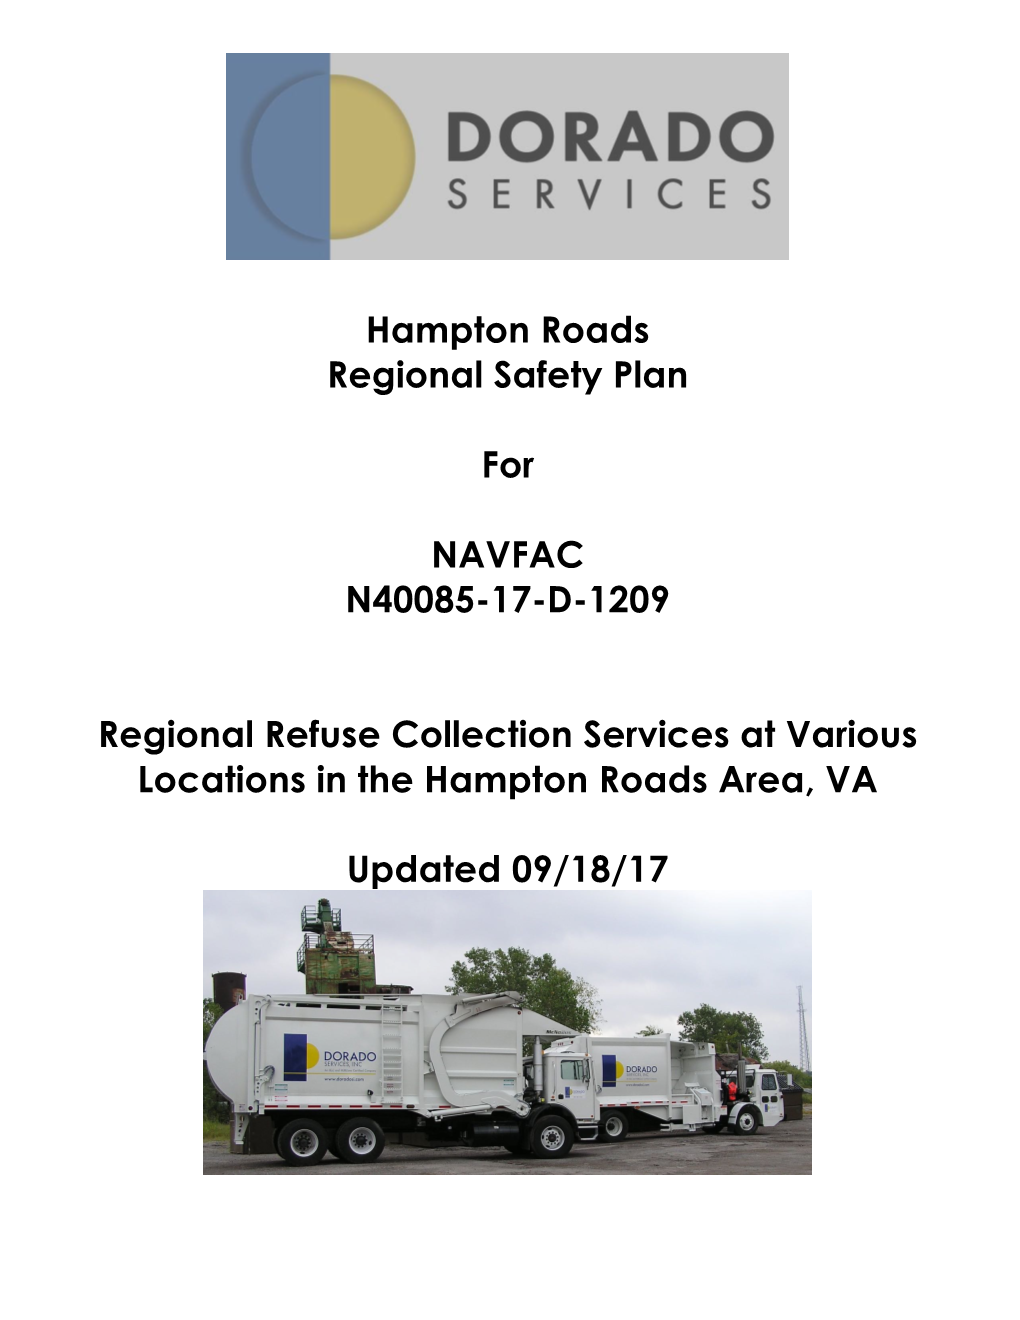 Hampton Roads Regional Safety Plan for NAVFAC N40085-17-D-1209 Regional Refuse Collection Services at Various Locations in T